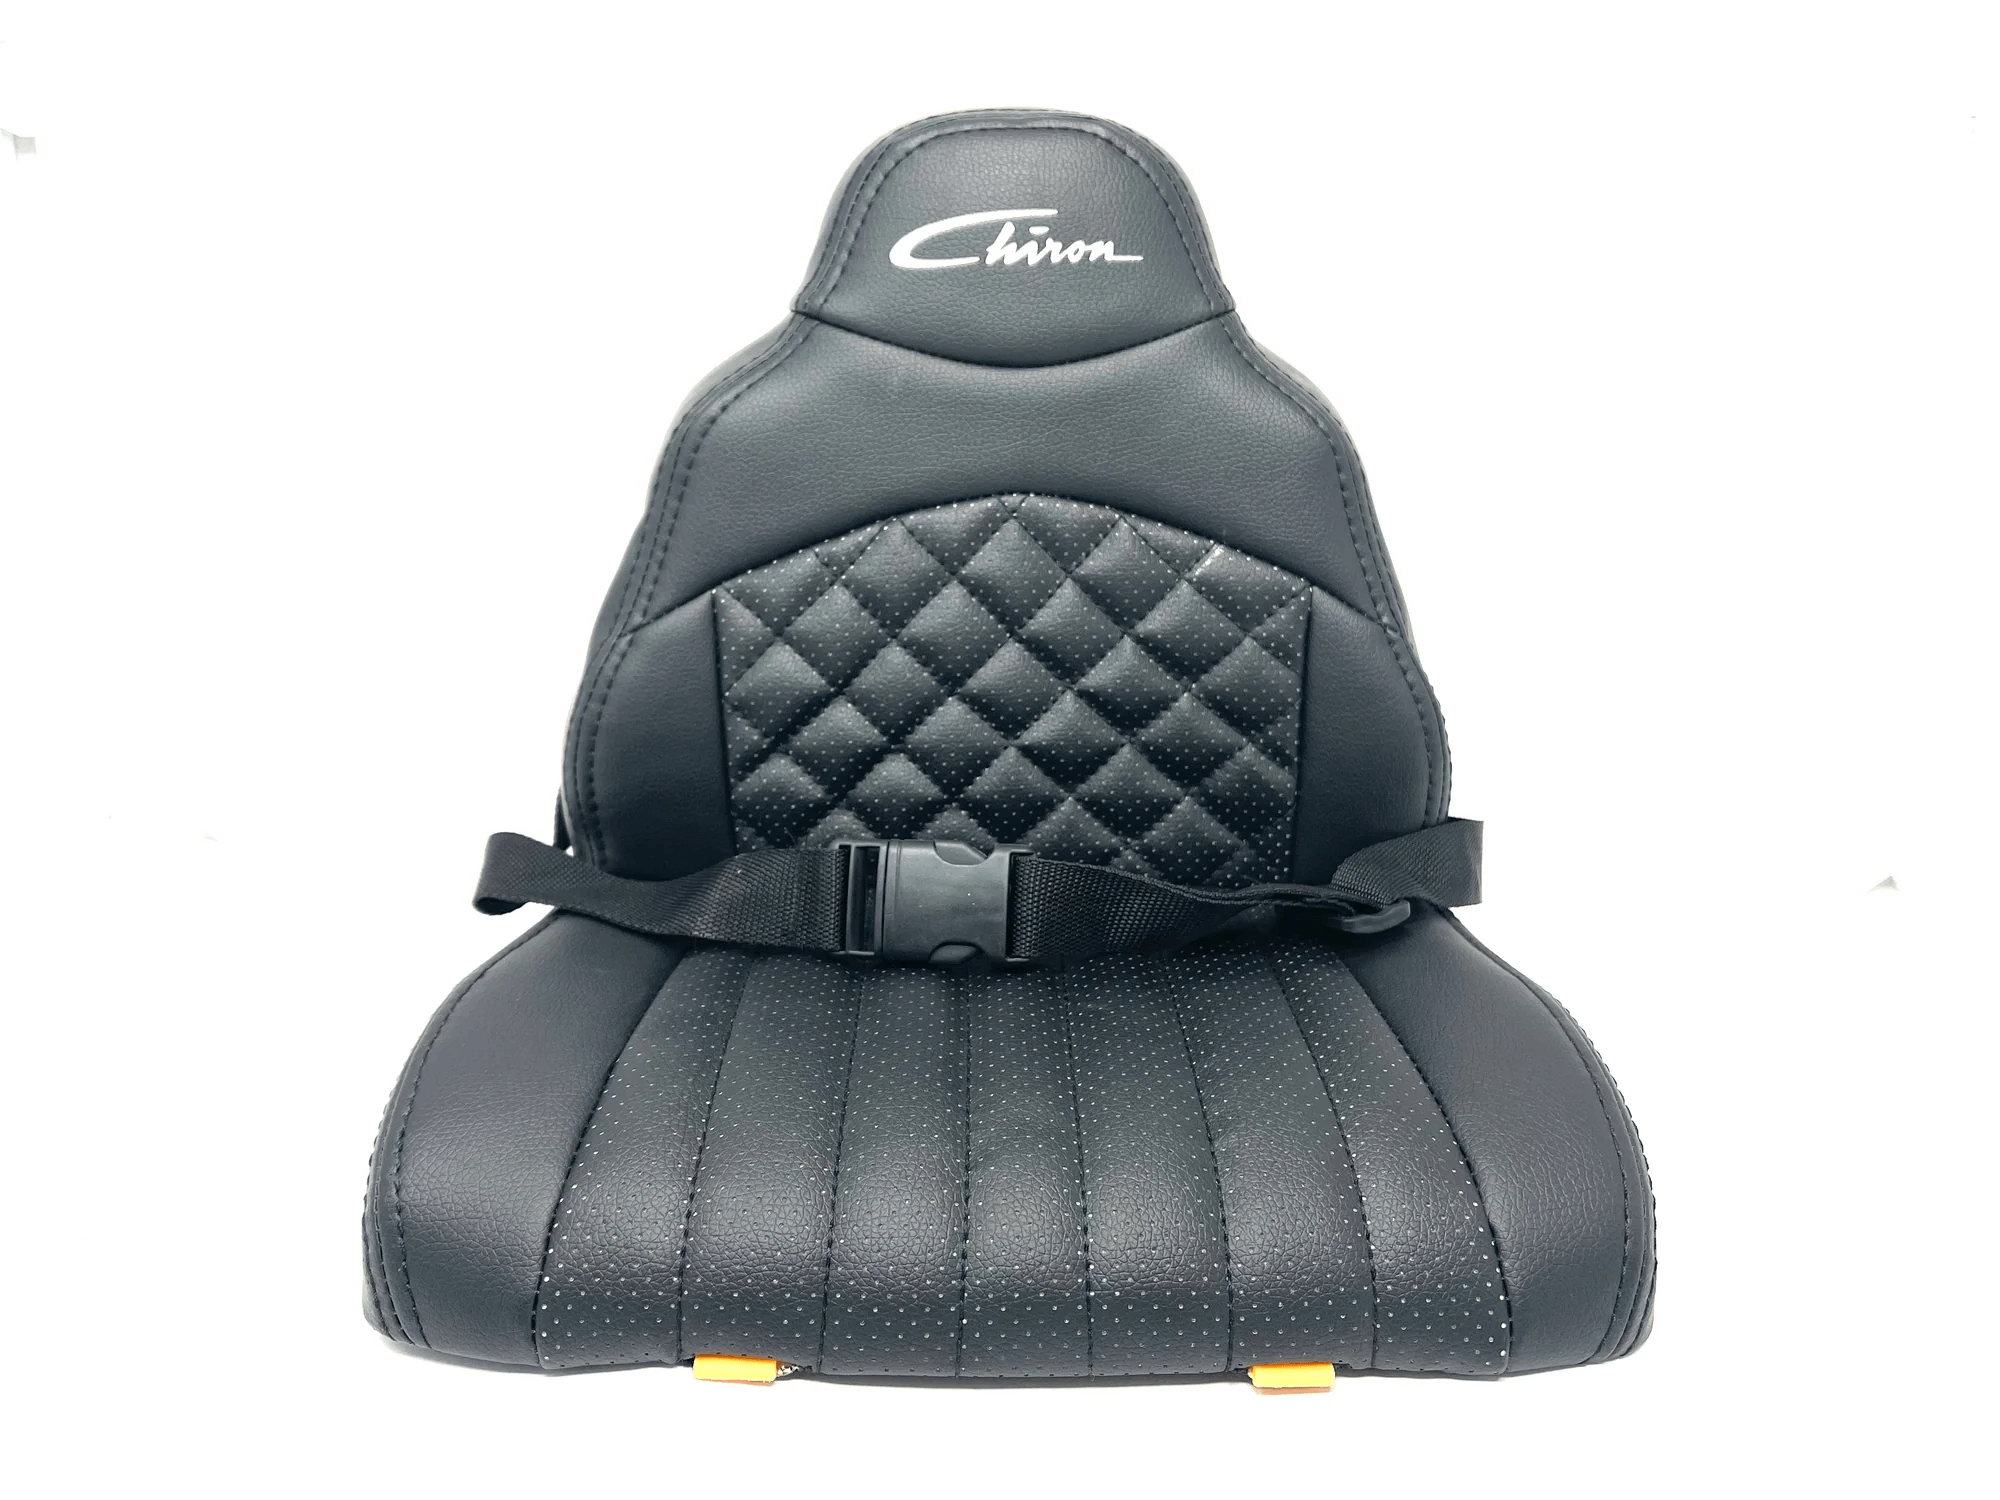 Eco Leather Seat for 12v Bugatti Chiron: Sustainable Luxury Upgrade for Kids’ Ride-On Cars